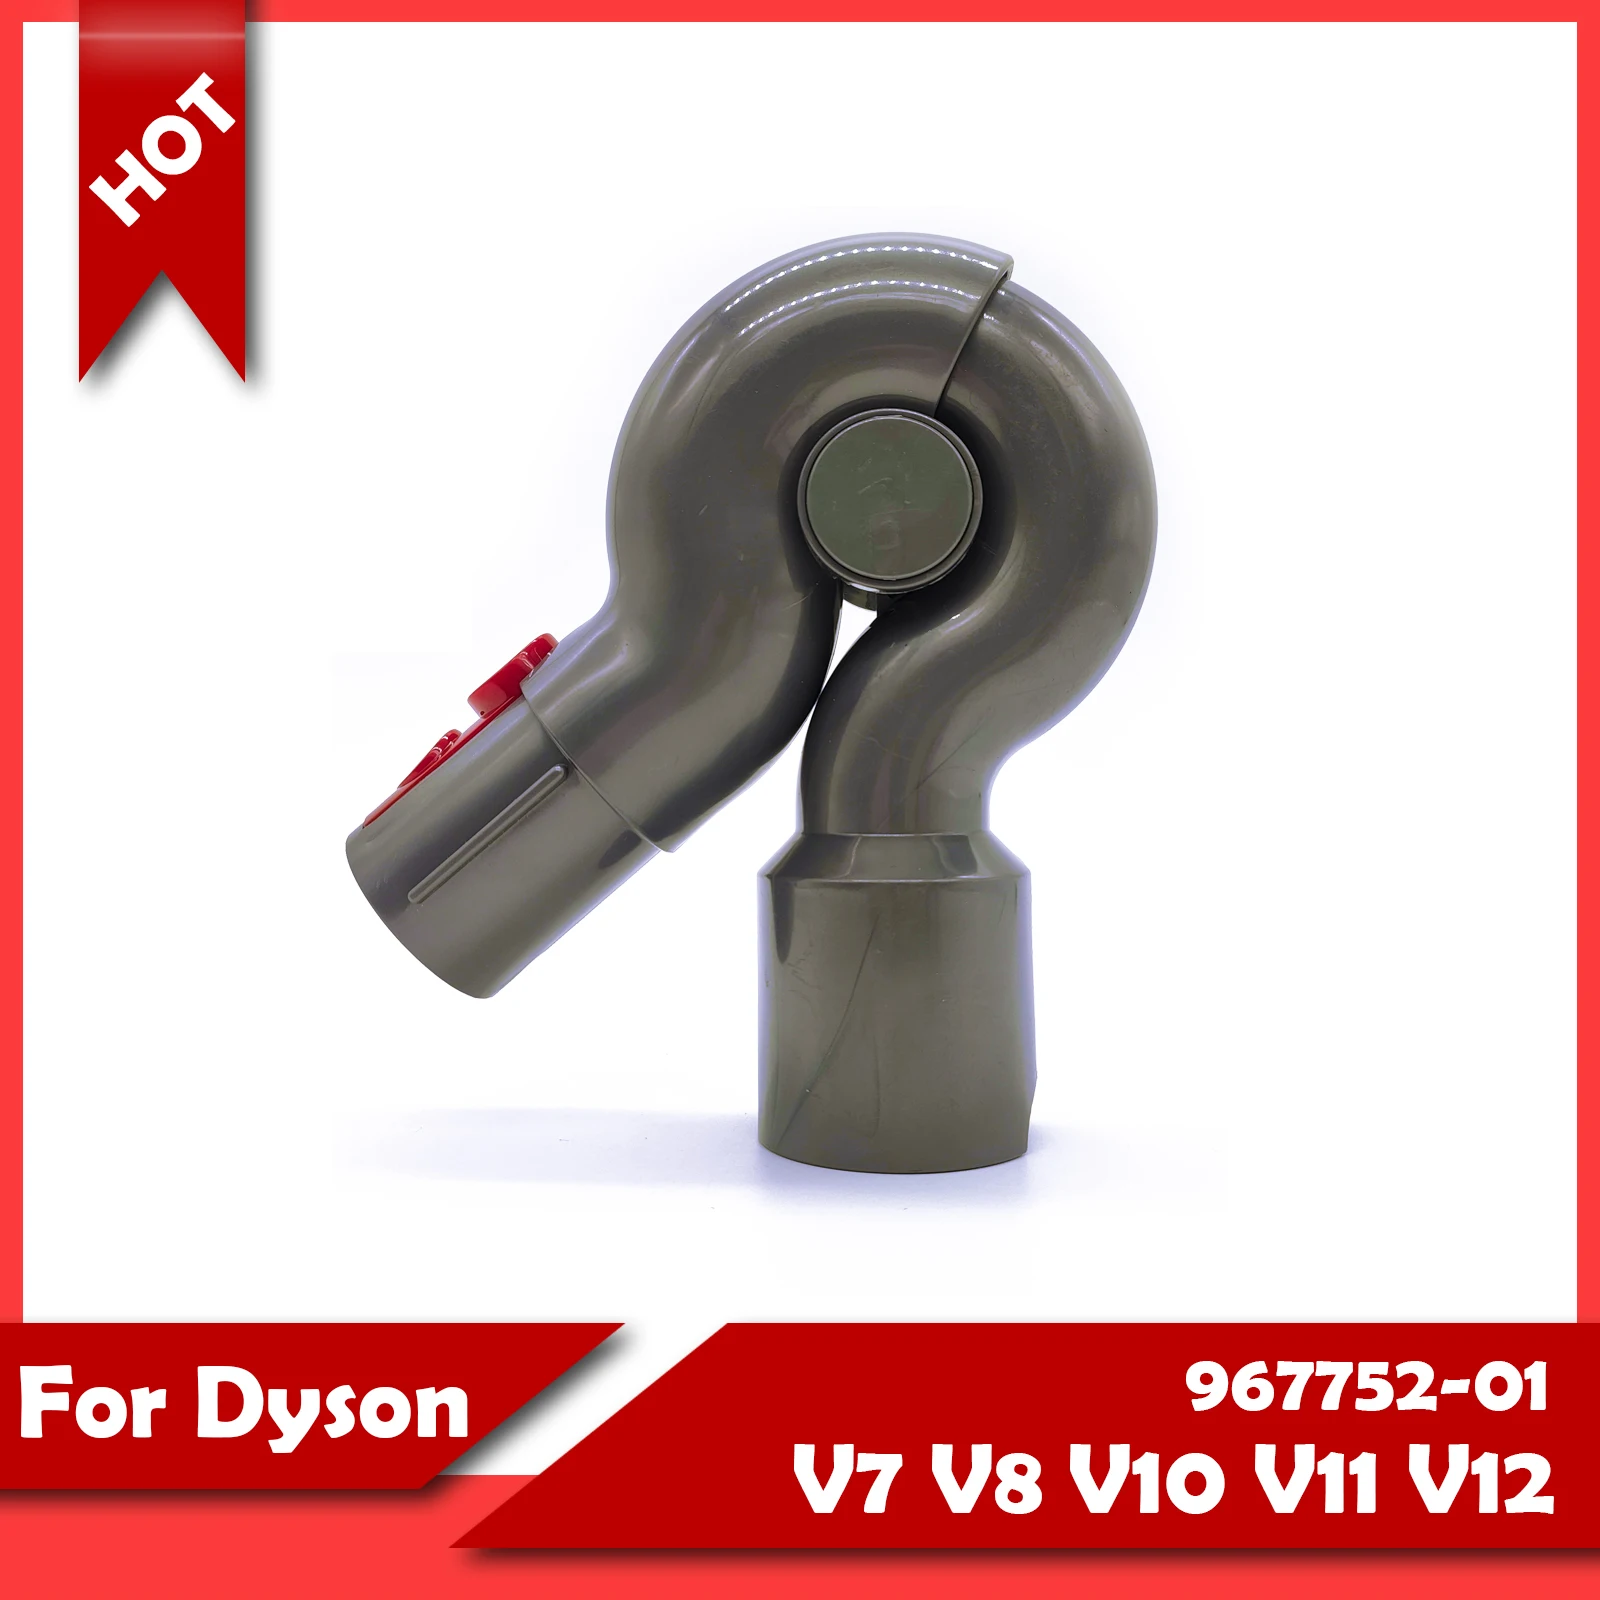 

For Dyson V7 V8 V10 V11 V12 Vacuum Cleaners Top Adjustable Adapter Head Attachment Compatible Quick Release Up Top Adaptor Tool